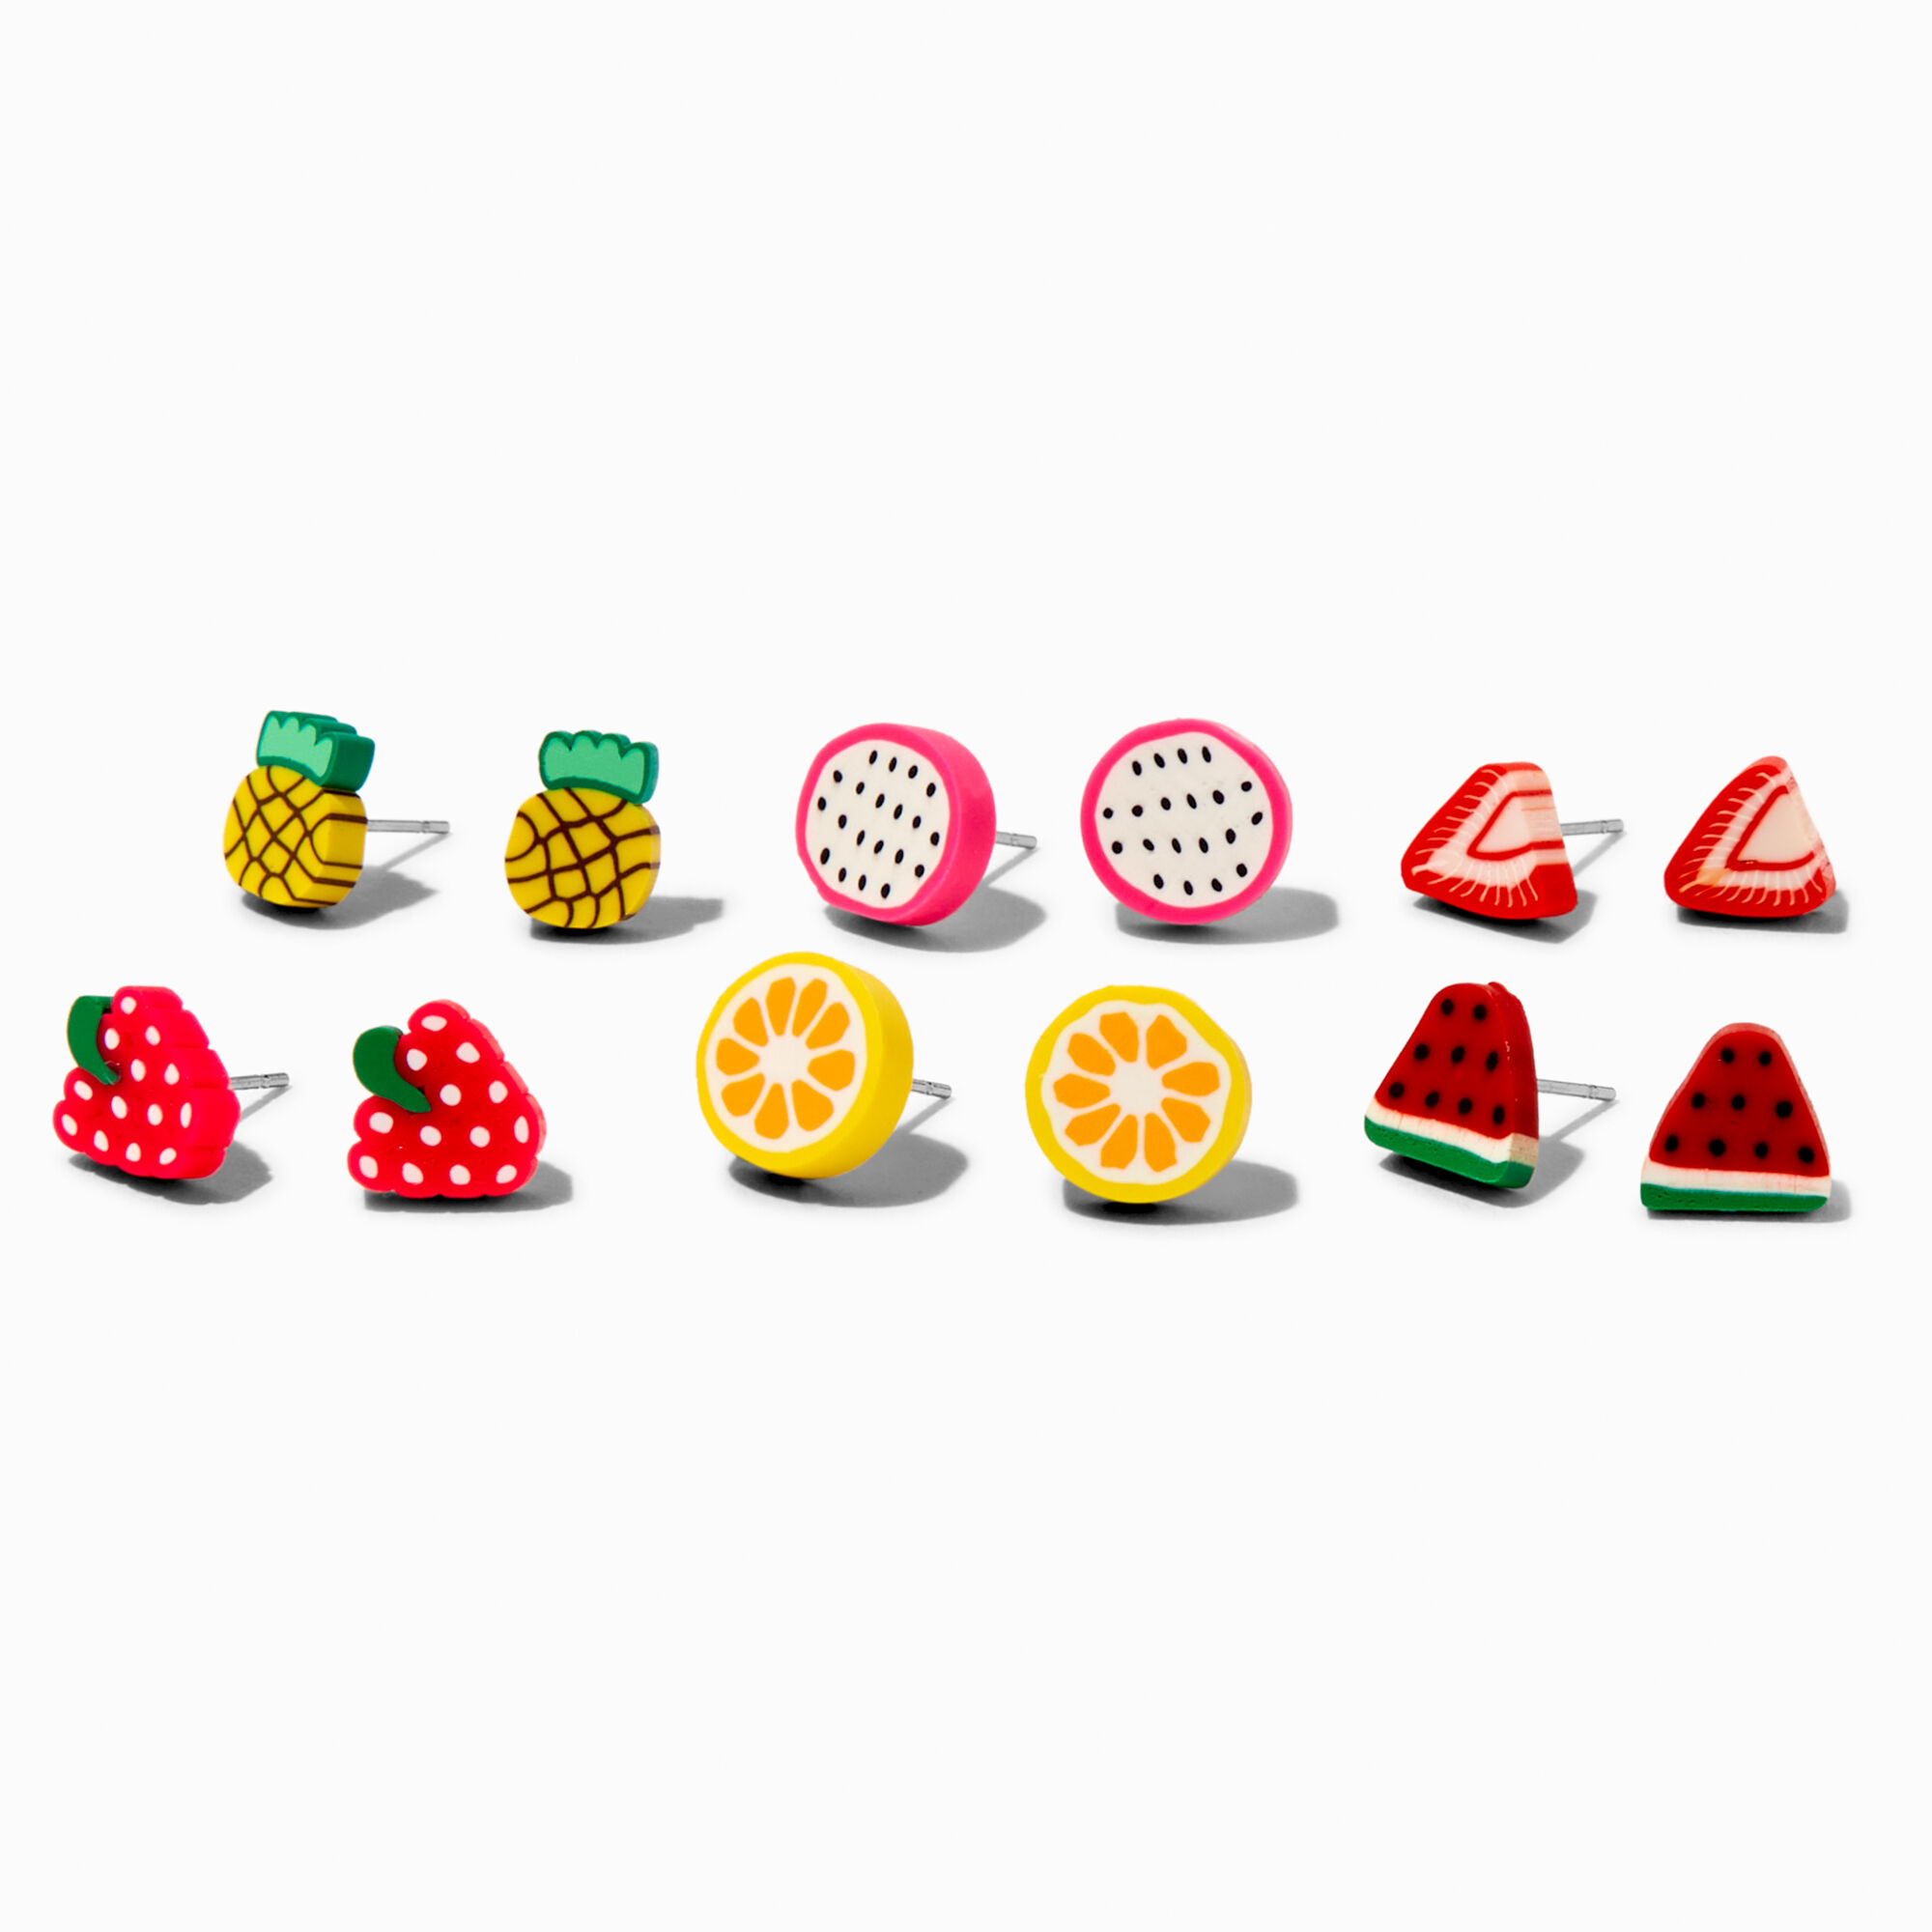 Of Adorable Fruit Shaped Polymer Clay Plastic Stud Earrings For Girls From  Wzgtd, $25.48